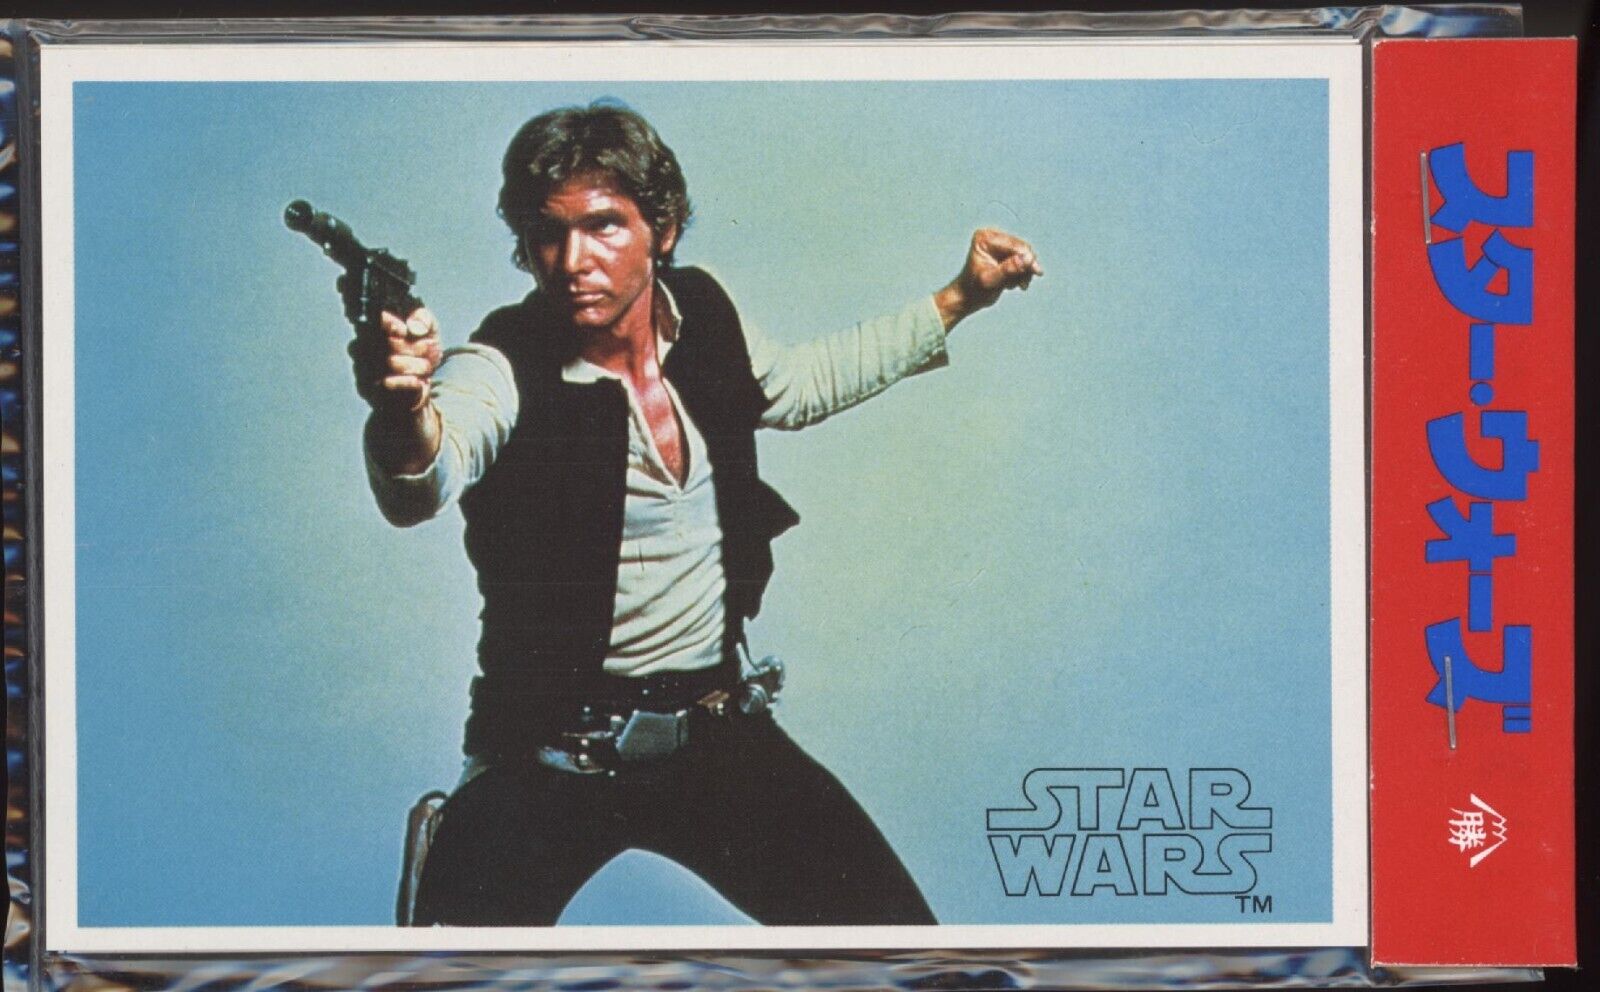 HAN SOLO 1977 Star Wars Japan Topps Yamakatsu Large Sealed Pack of 4 Cards Star Wars Sealed Pack - Hobby Gems